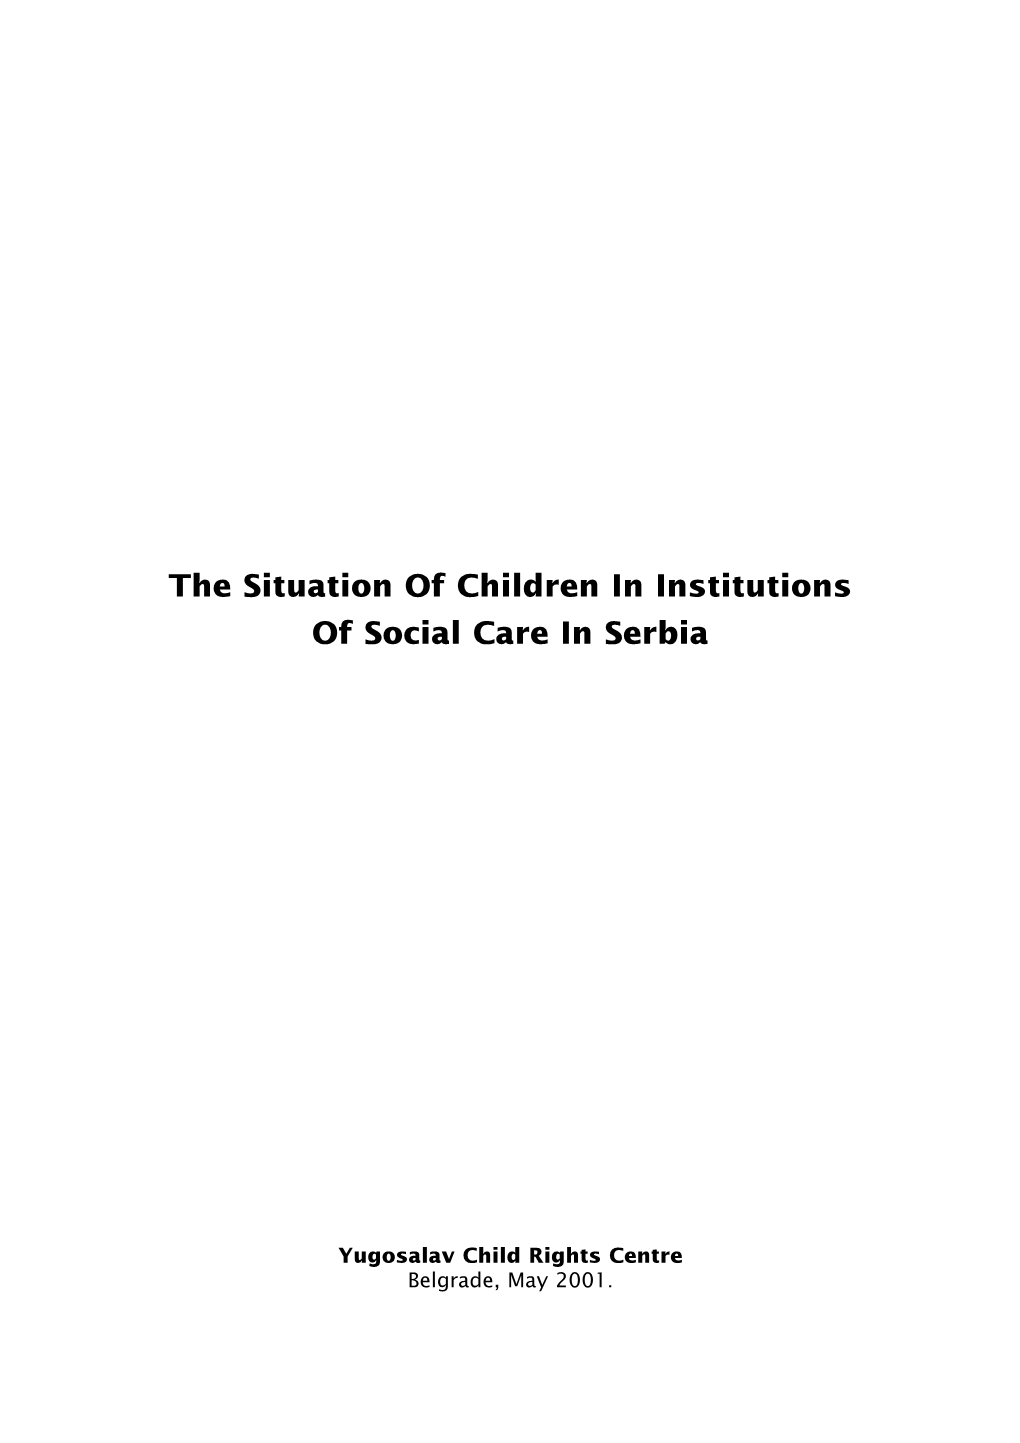 The Situation of Children in Institutions of Social Care in Serbia